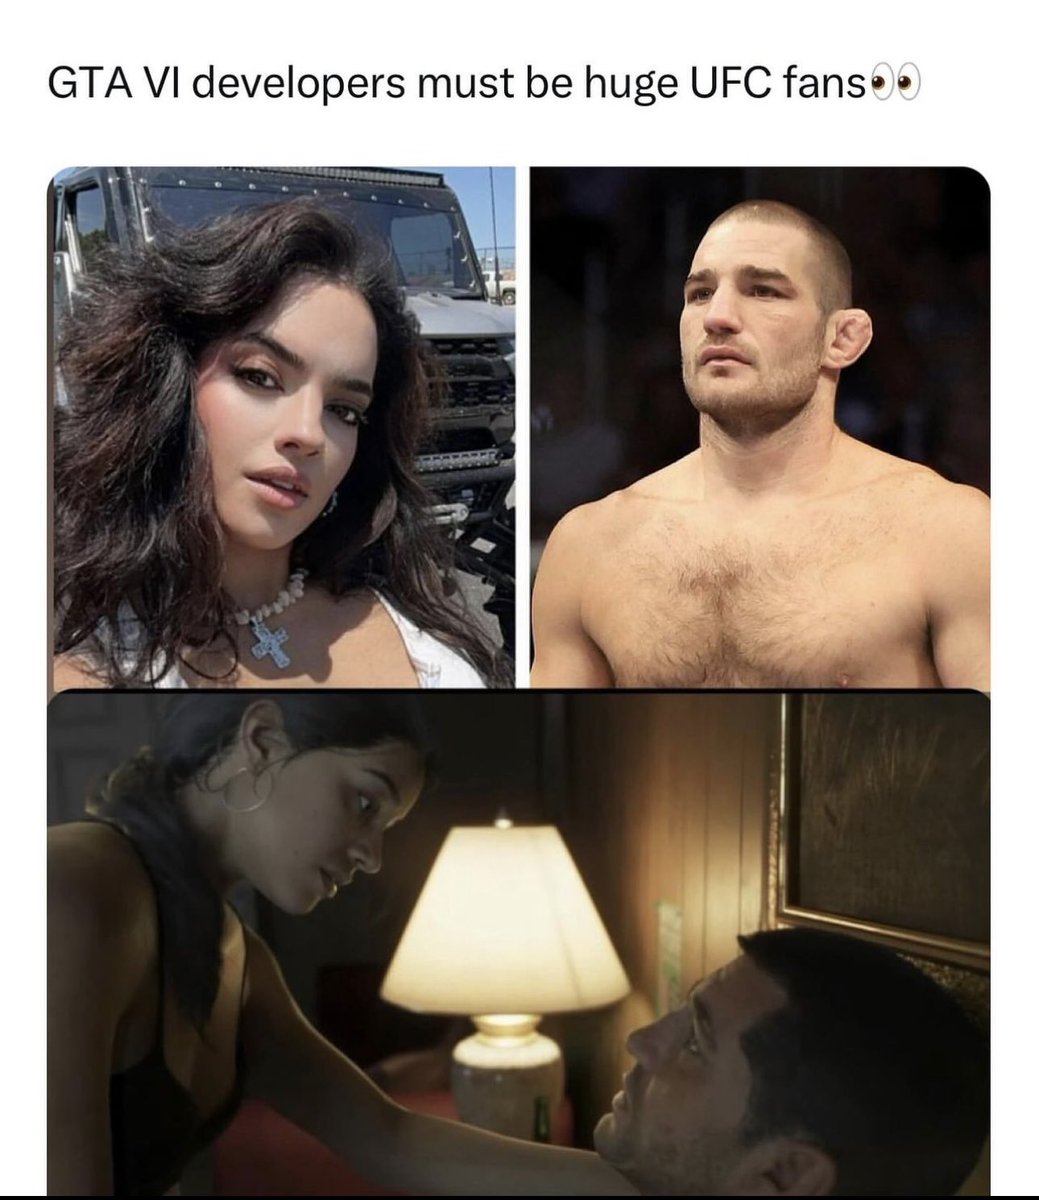 The dude looks like Sean Strickland for sure. The girl is apparently trans according to the internet. Can someone confirm? LOL @SStricklandMMA #GTA6